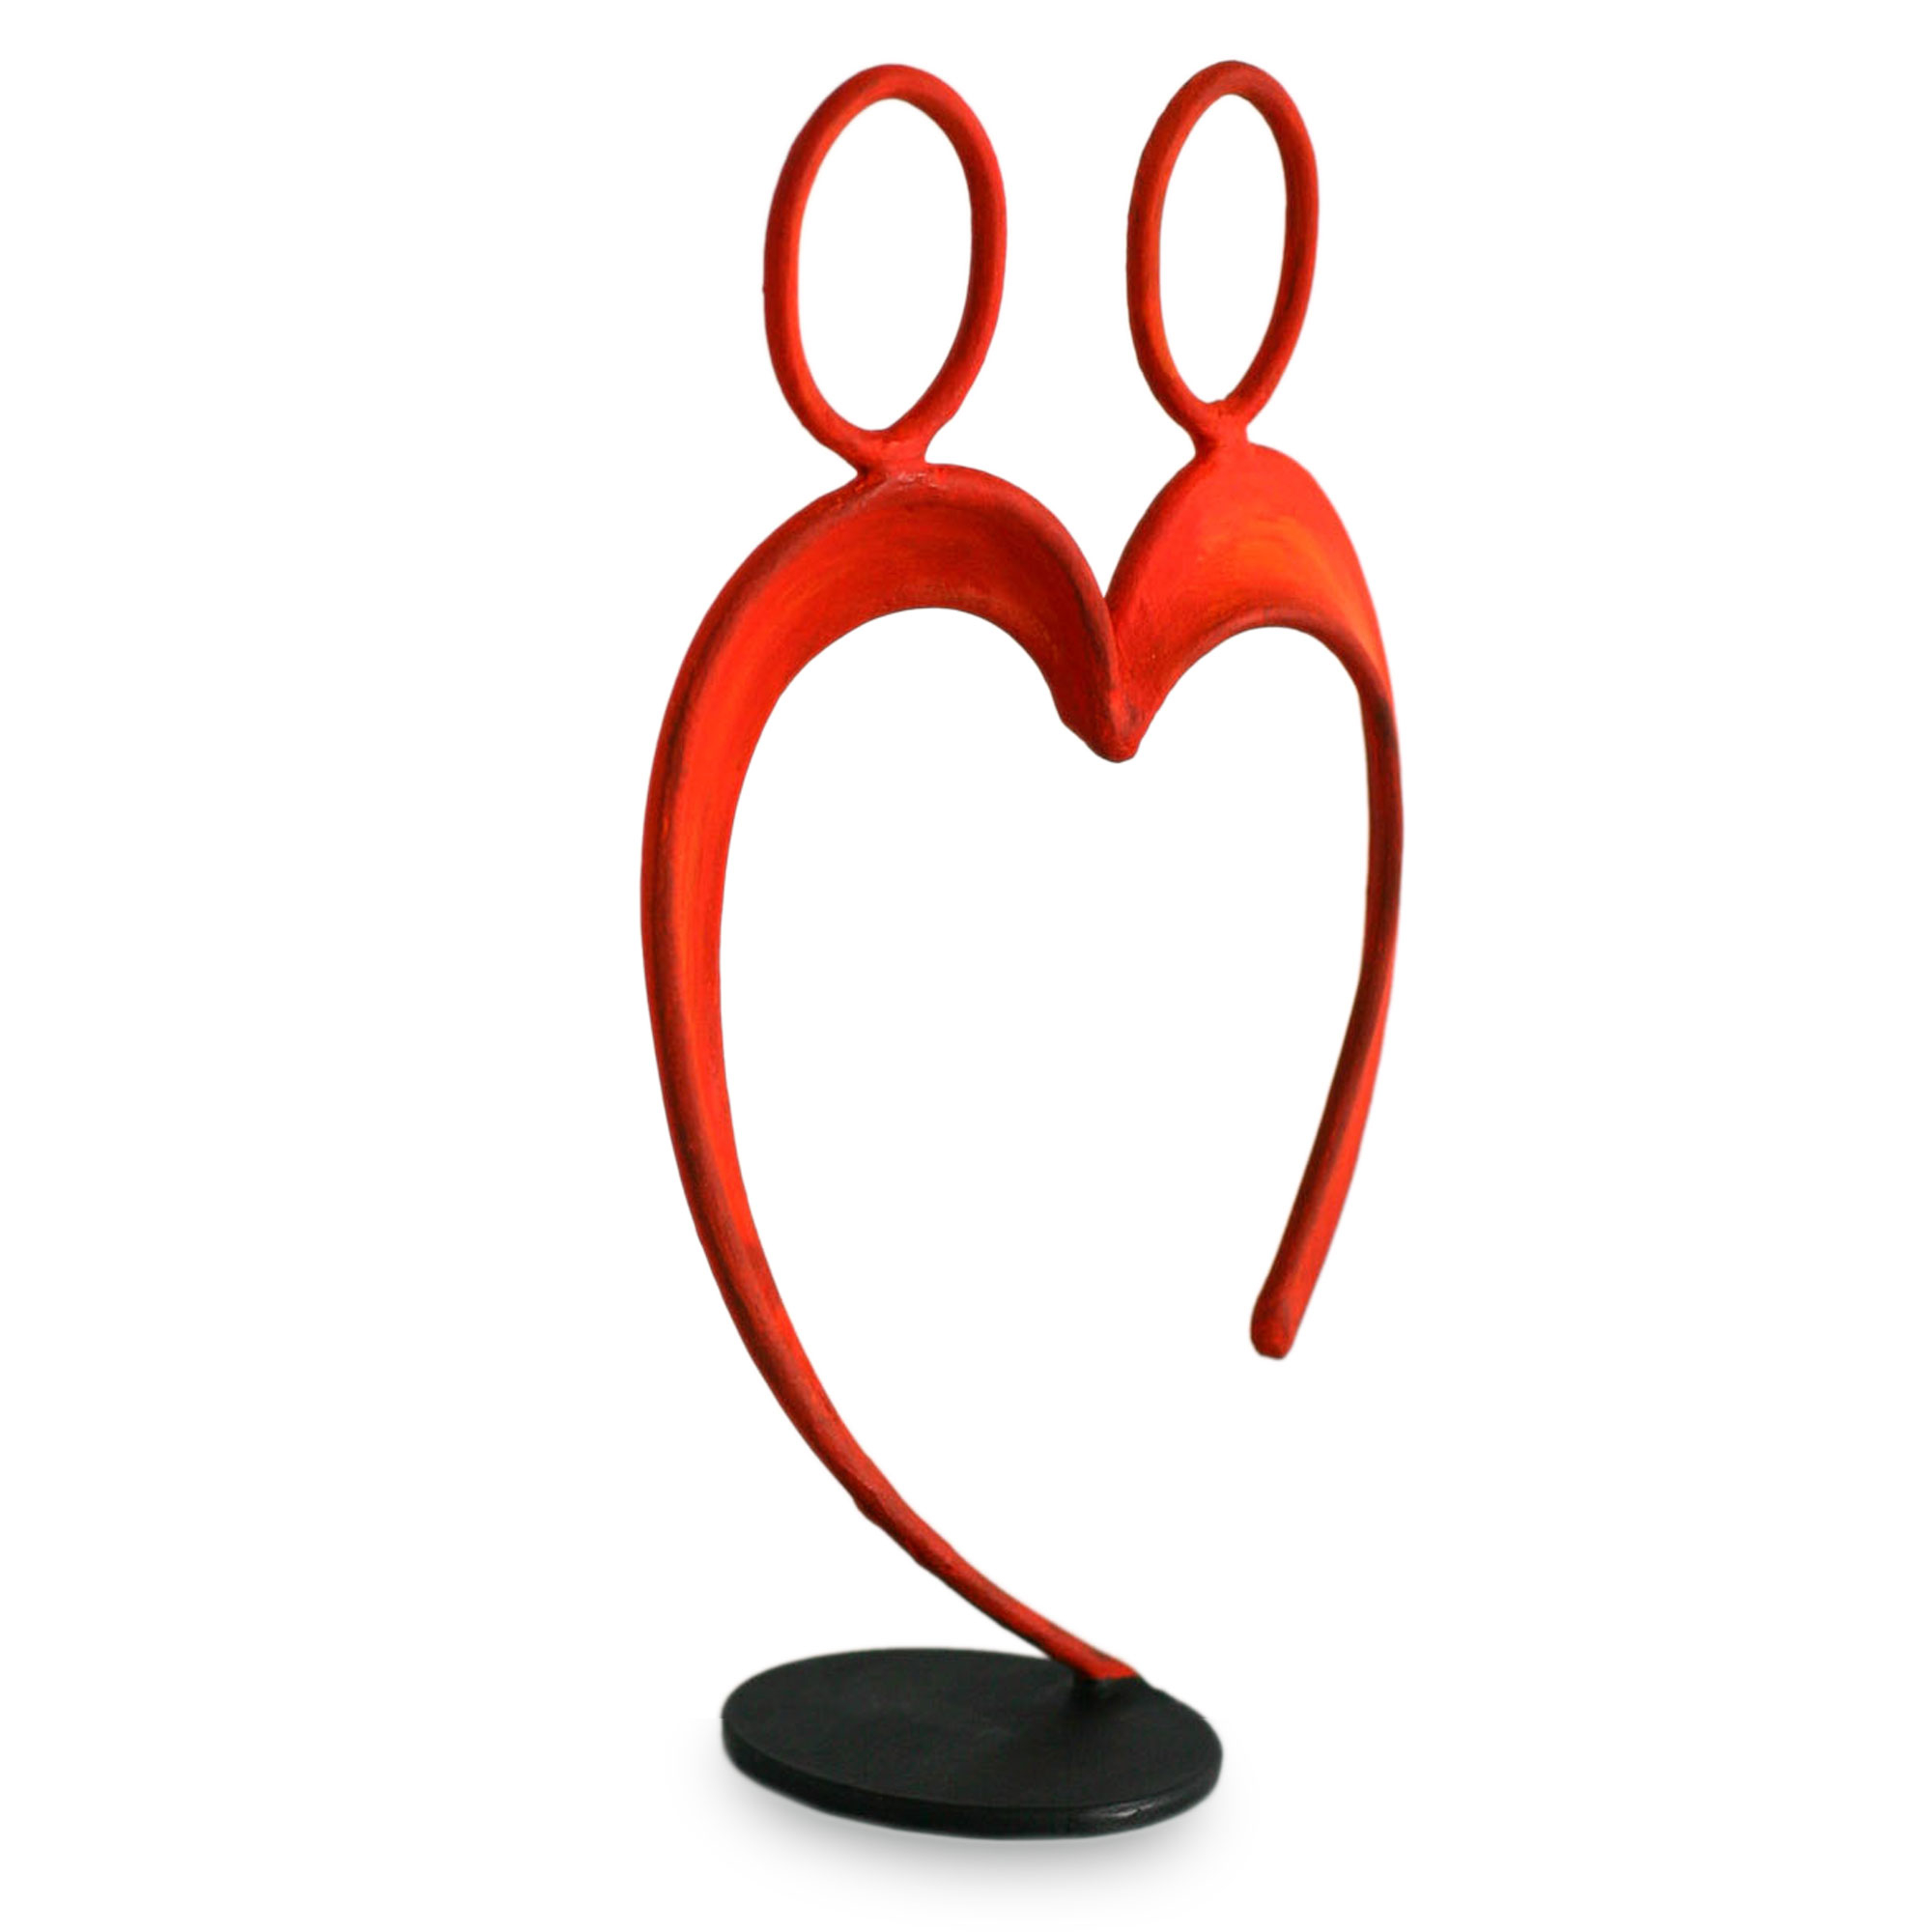 UNICEF Market | Romantic Red Heart Steel Sculpture - Of Rings and Hearts